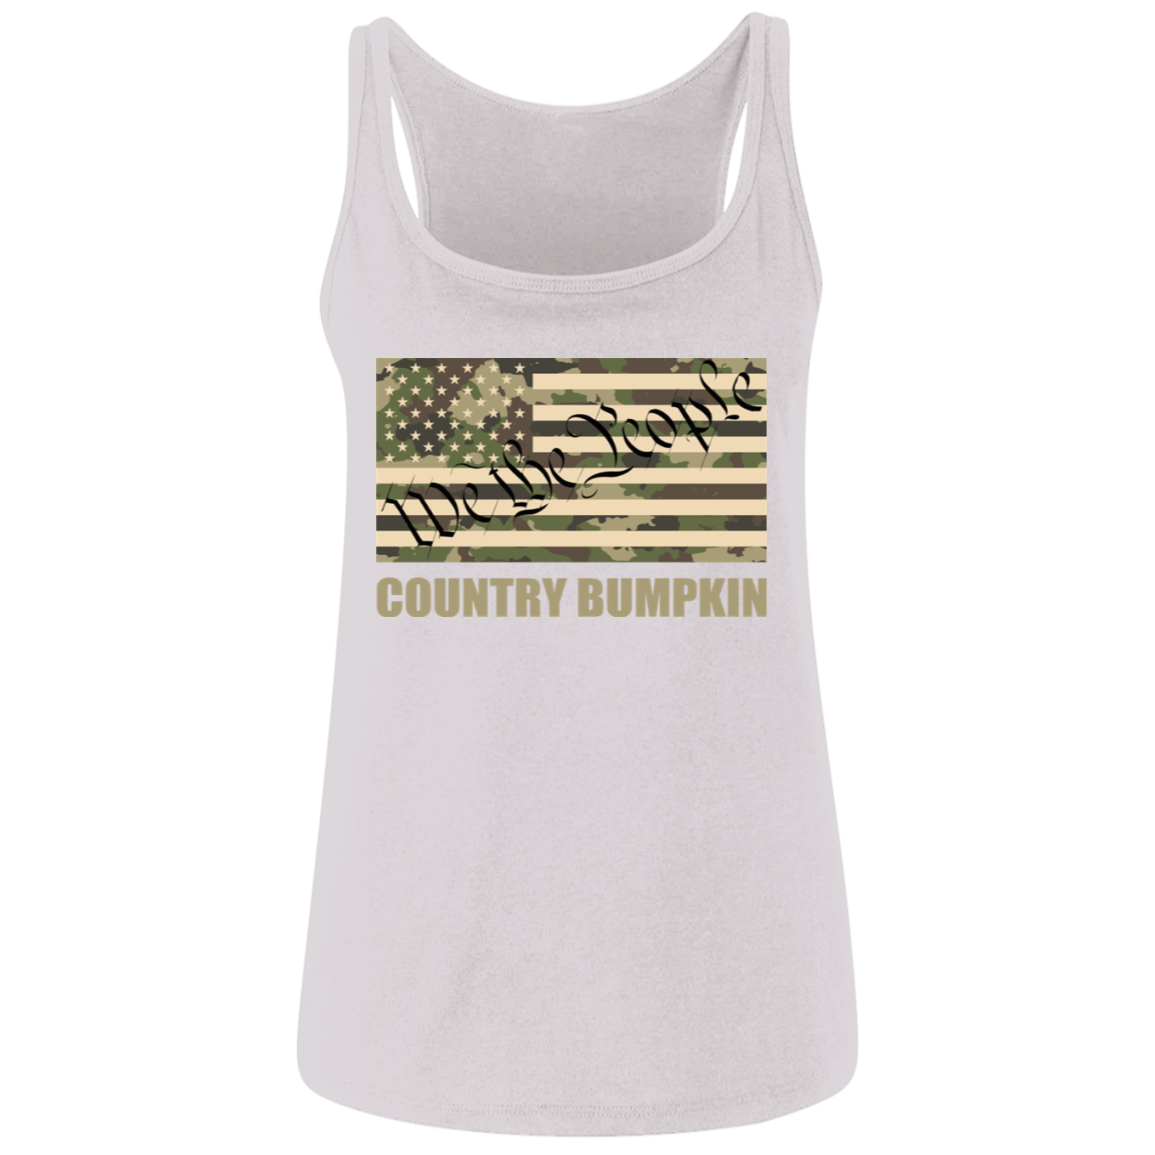 Country Bumpkin "We The People" Camo Flag Ladies' Relaxed Jersey Tank